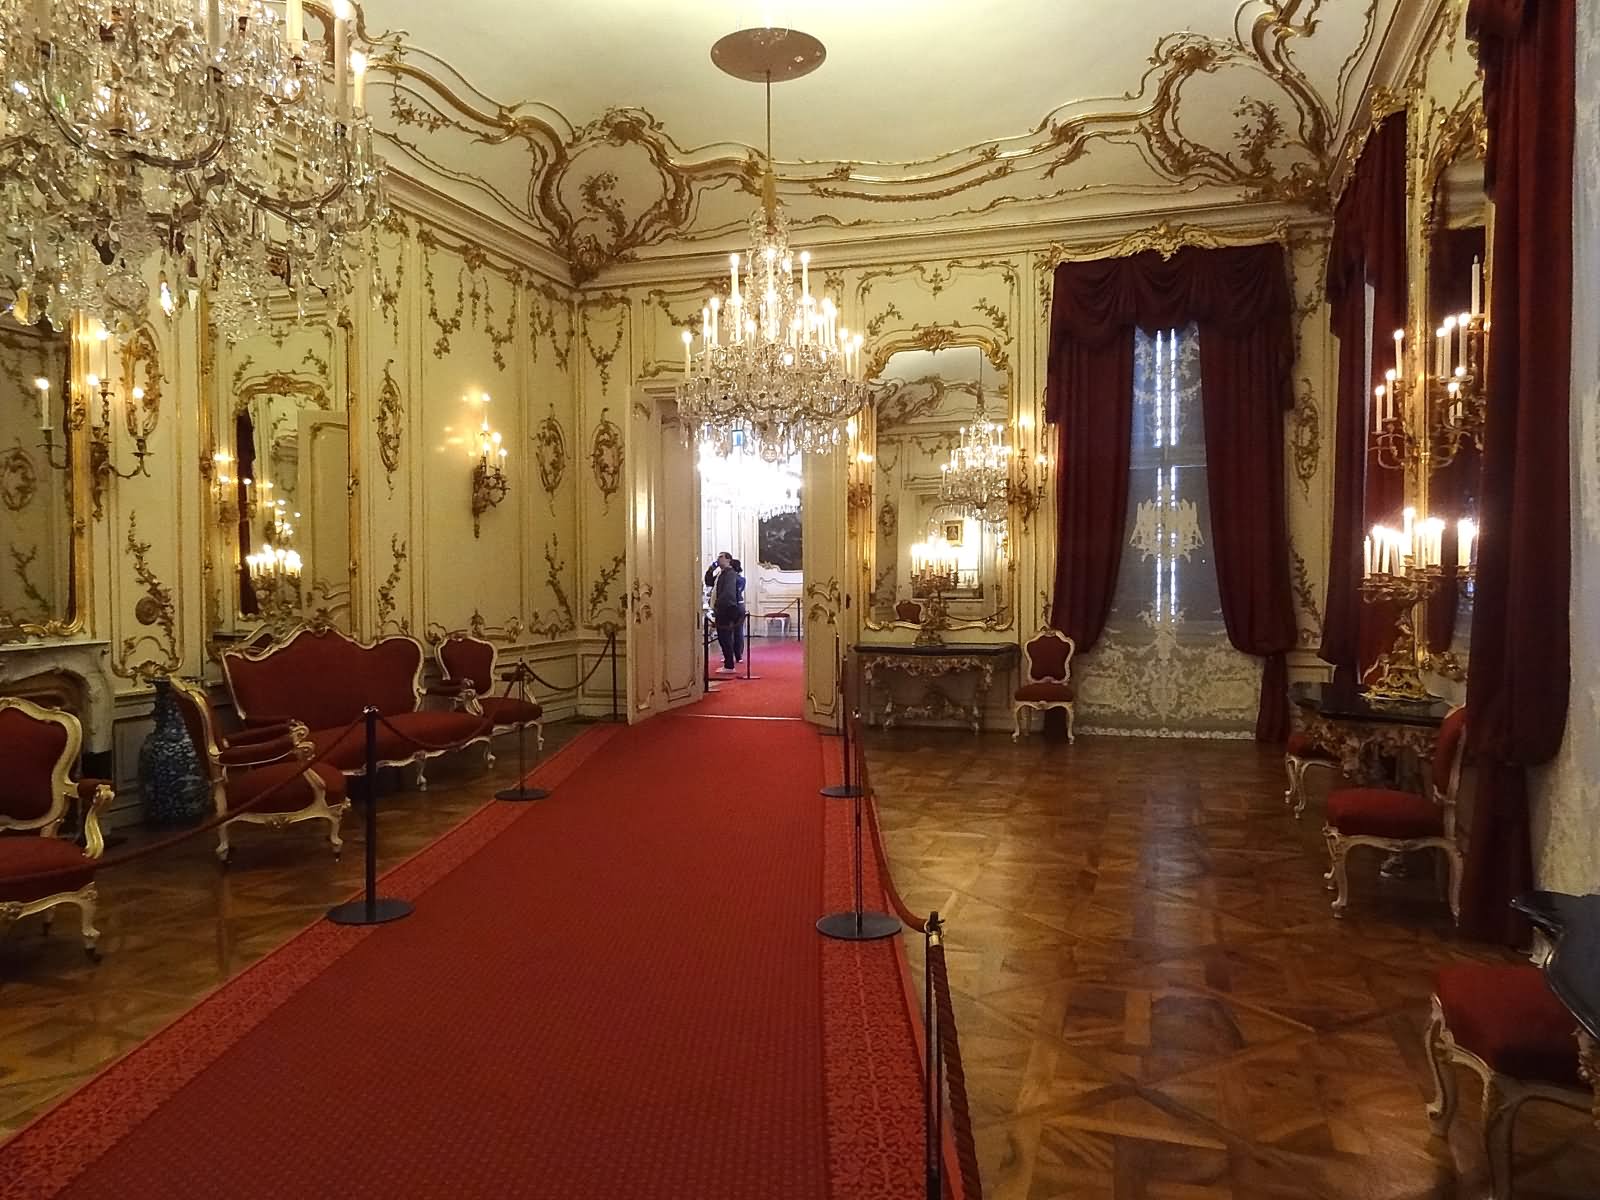 The Schonbrunn Palace Interior Image